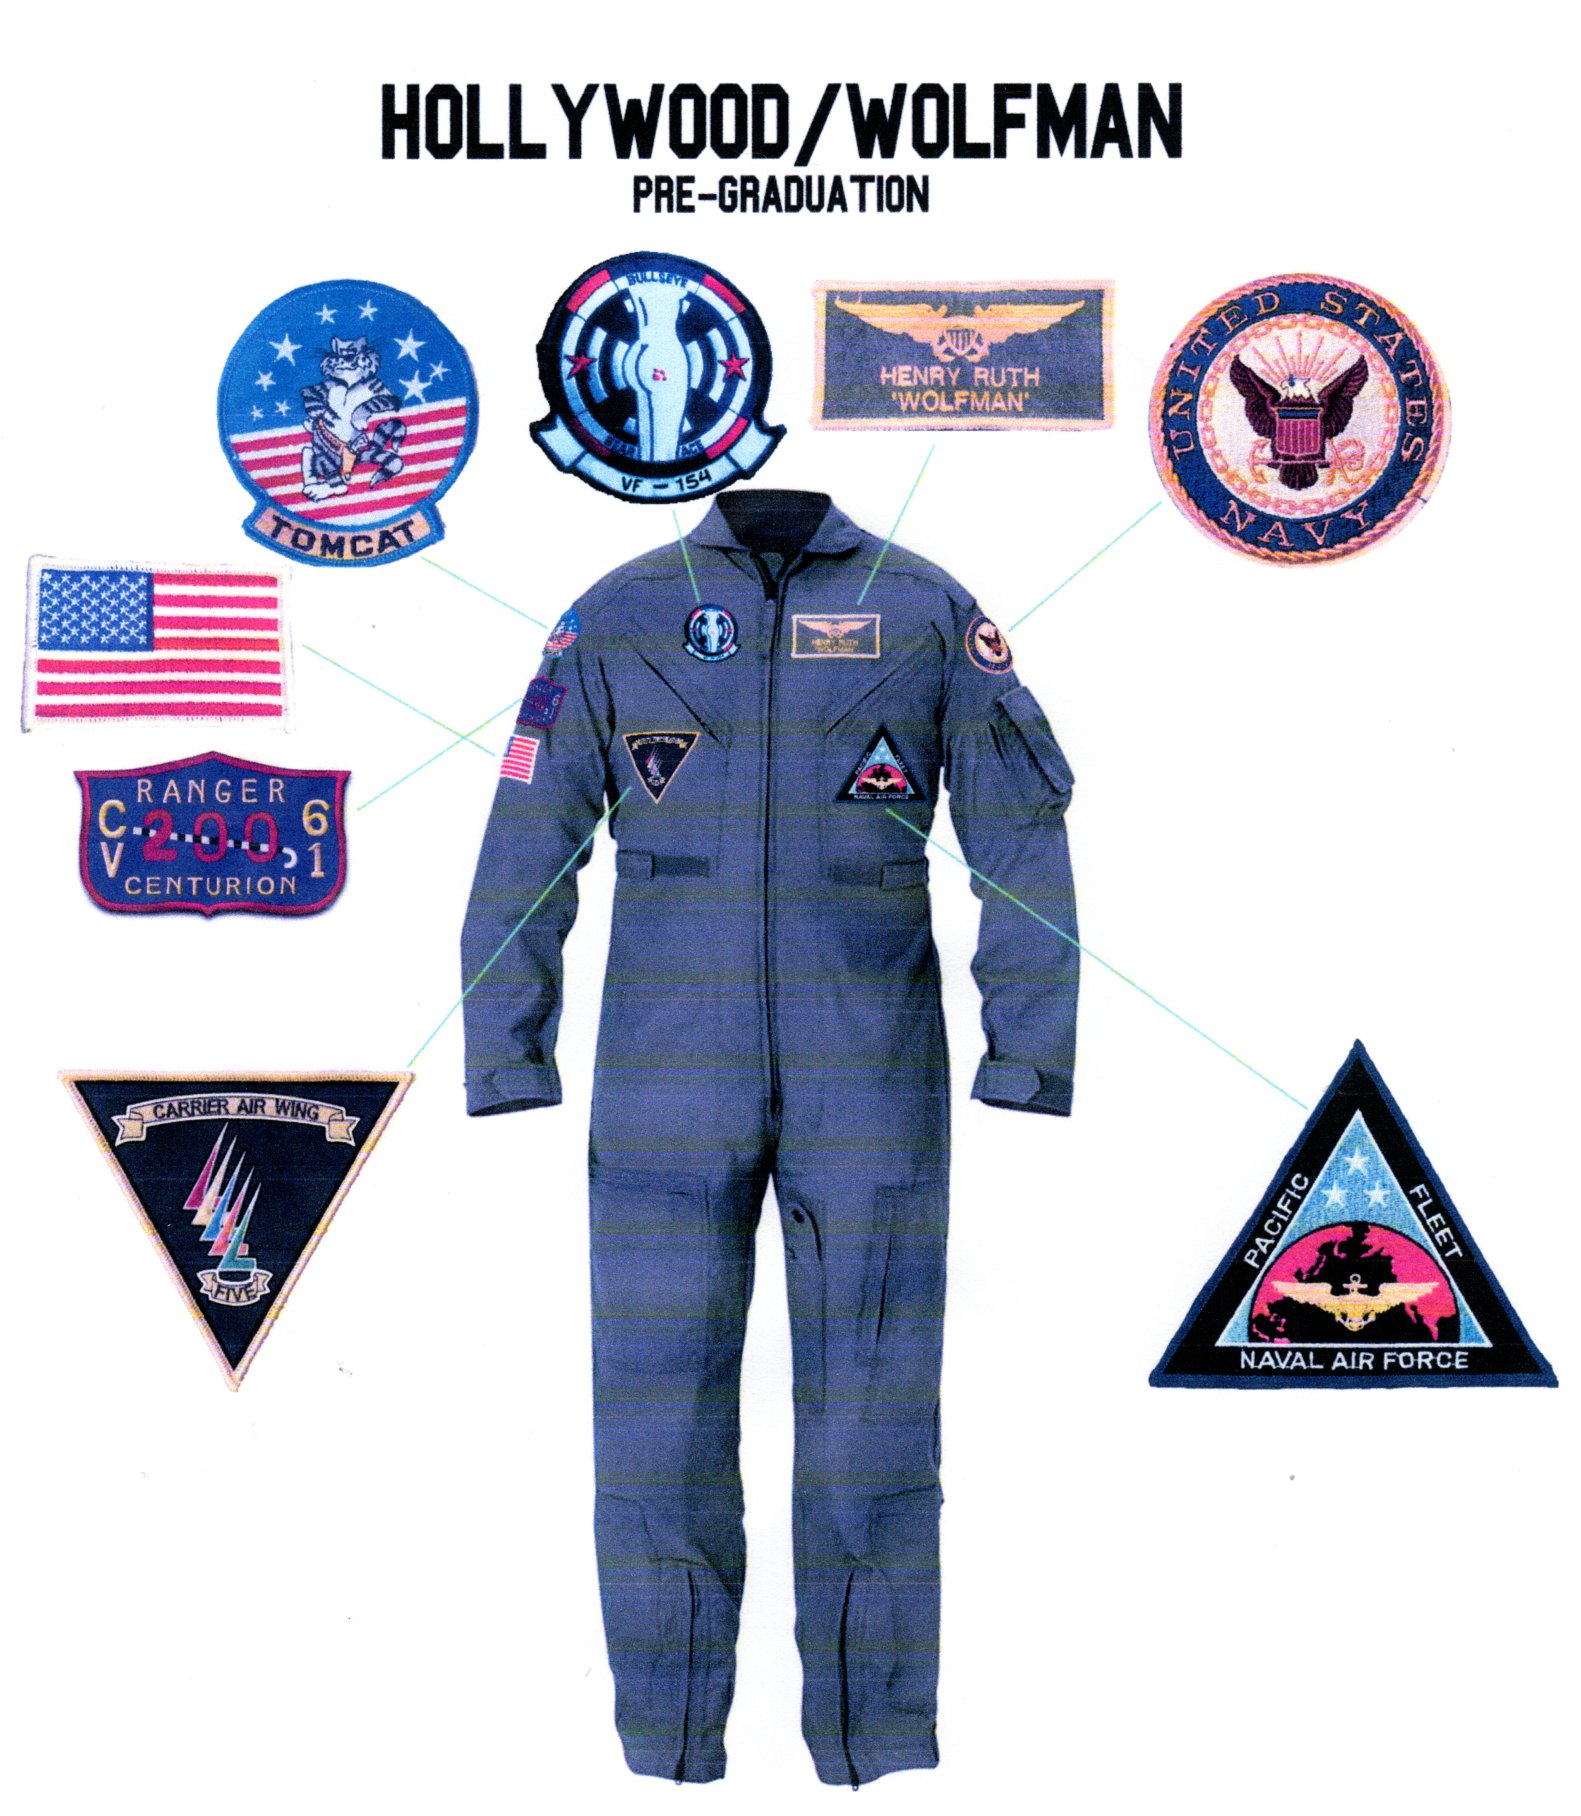 HOLLYWOOD's 'Pre-Grad' FS Patches!